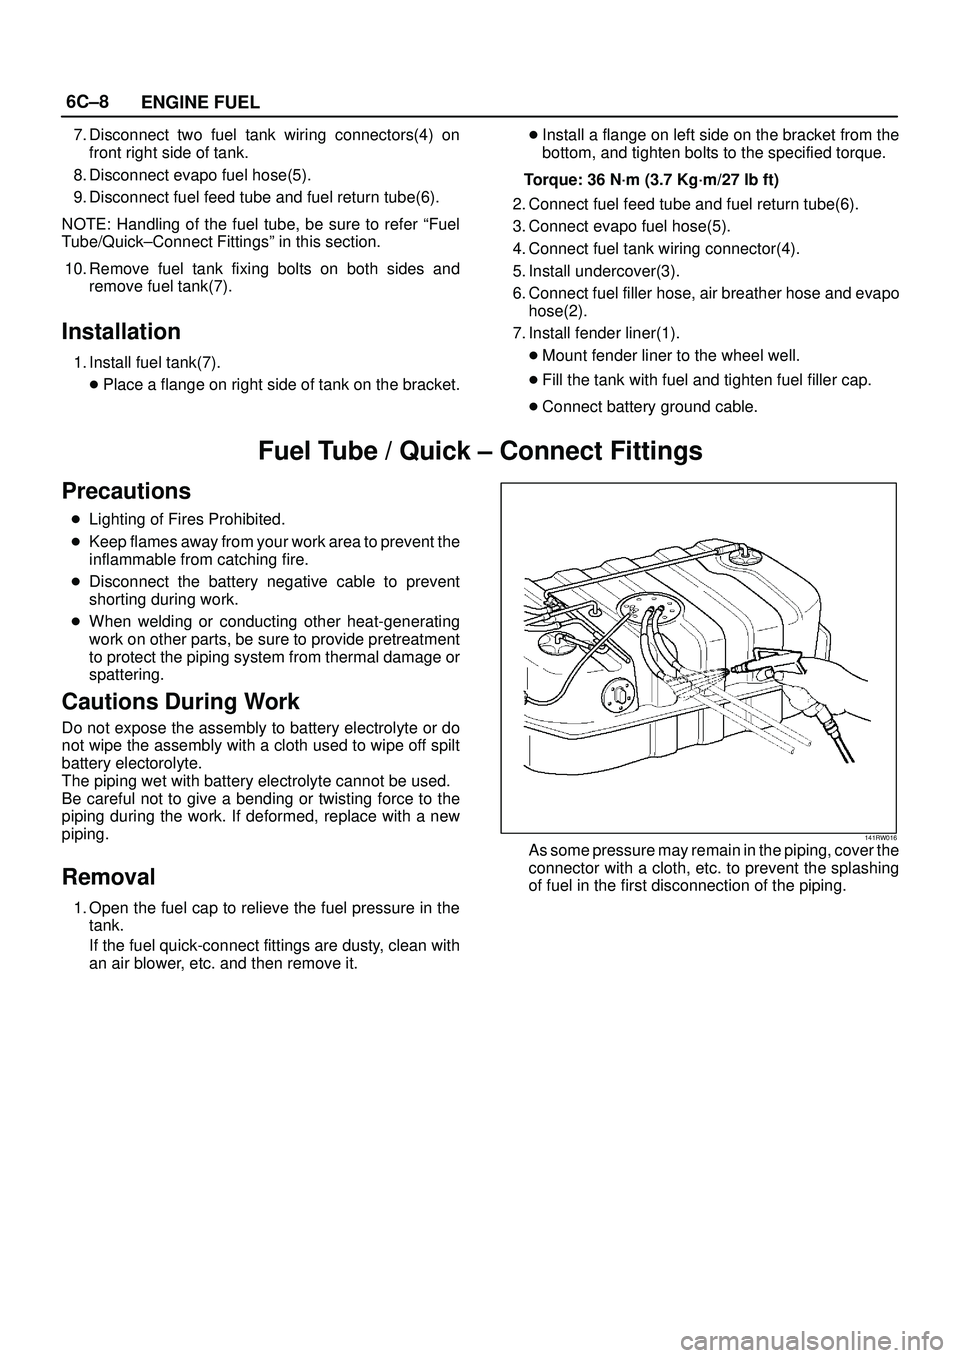 ISUZU TROOPER 1998  Service Repair Manual 6C±8
ENGINE FUEL
7. Disconnect two fuel tank wiring connectors(4) on
front right side of tank.
8. Disconnect evapo fuel hose(5).
9. Disconnect fuel feed tube and fuel return tube(6).
NOTE: Handling o